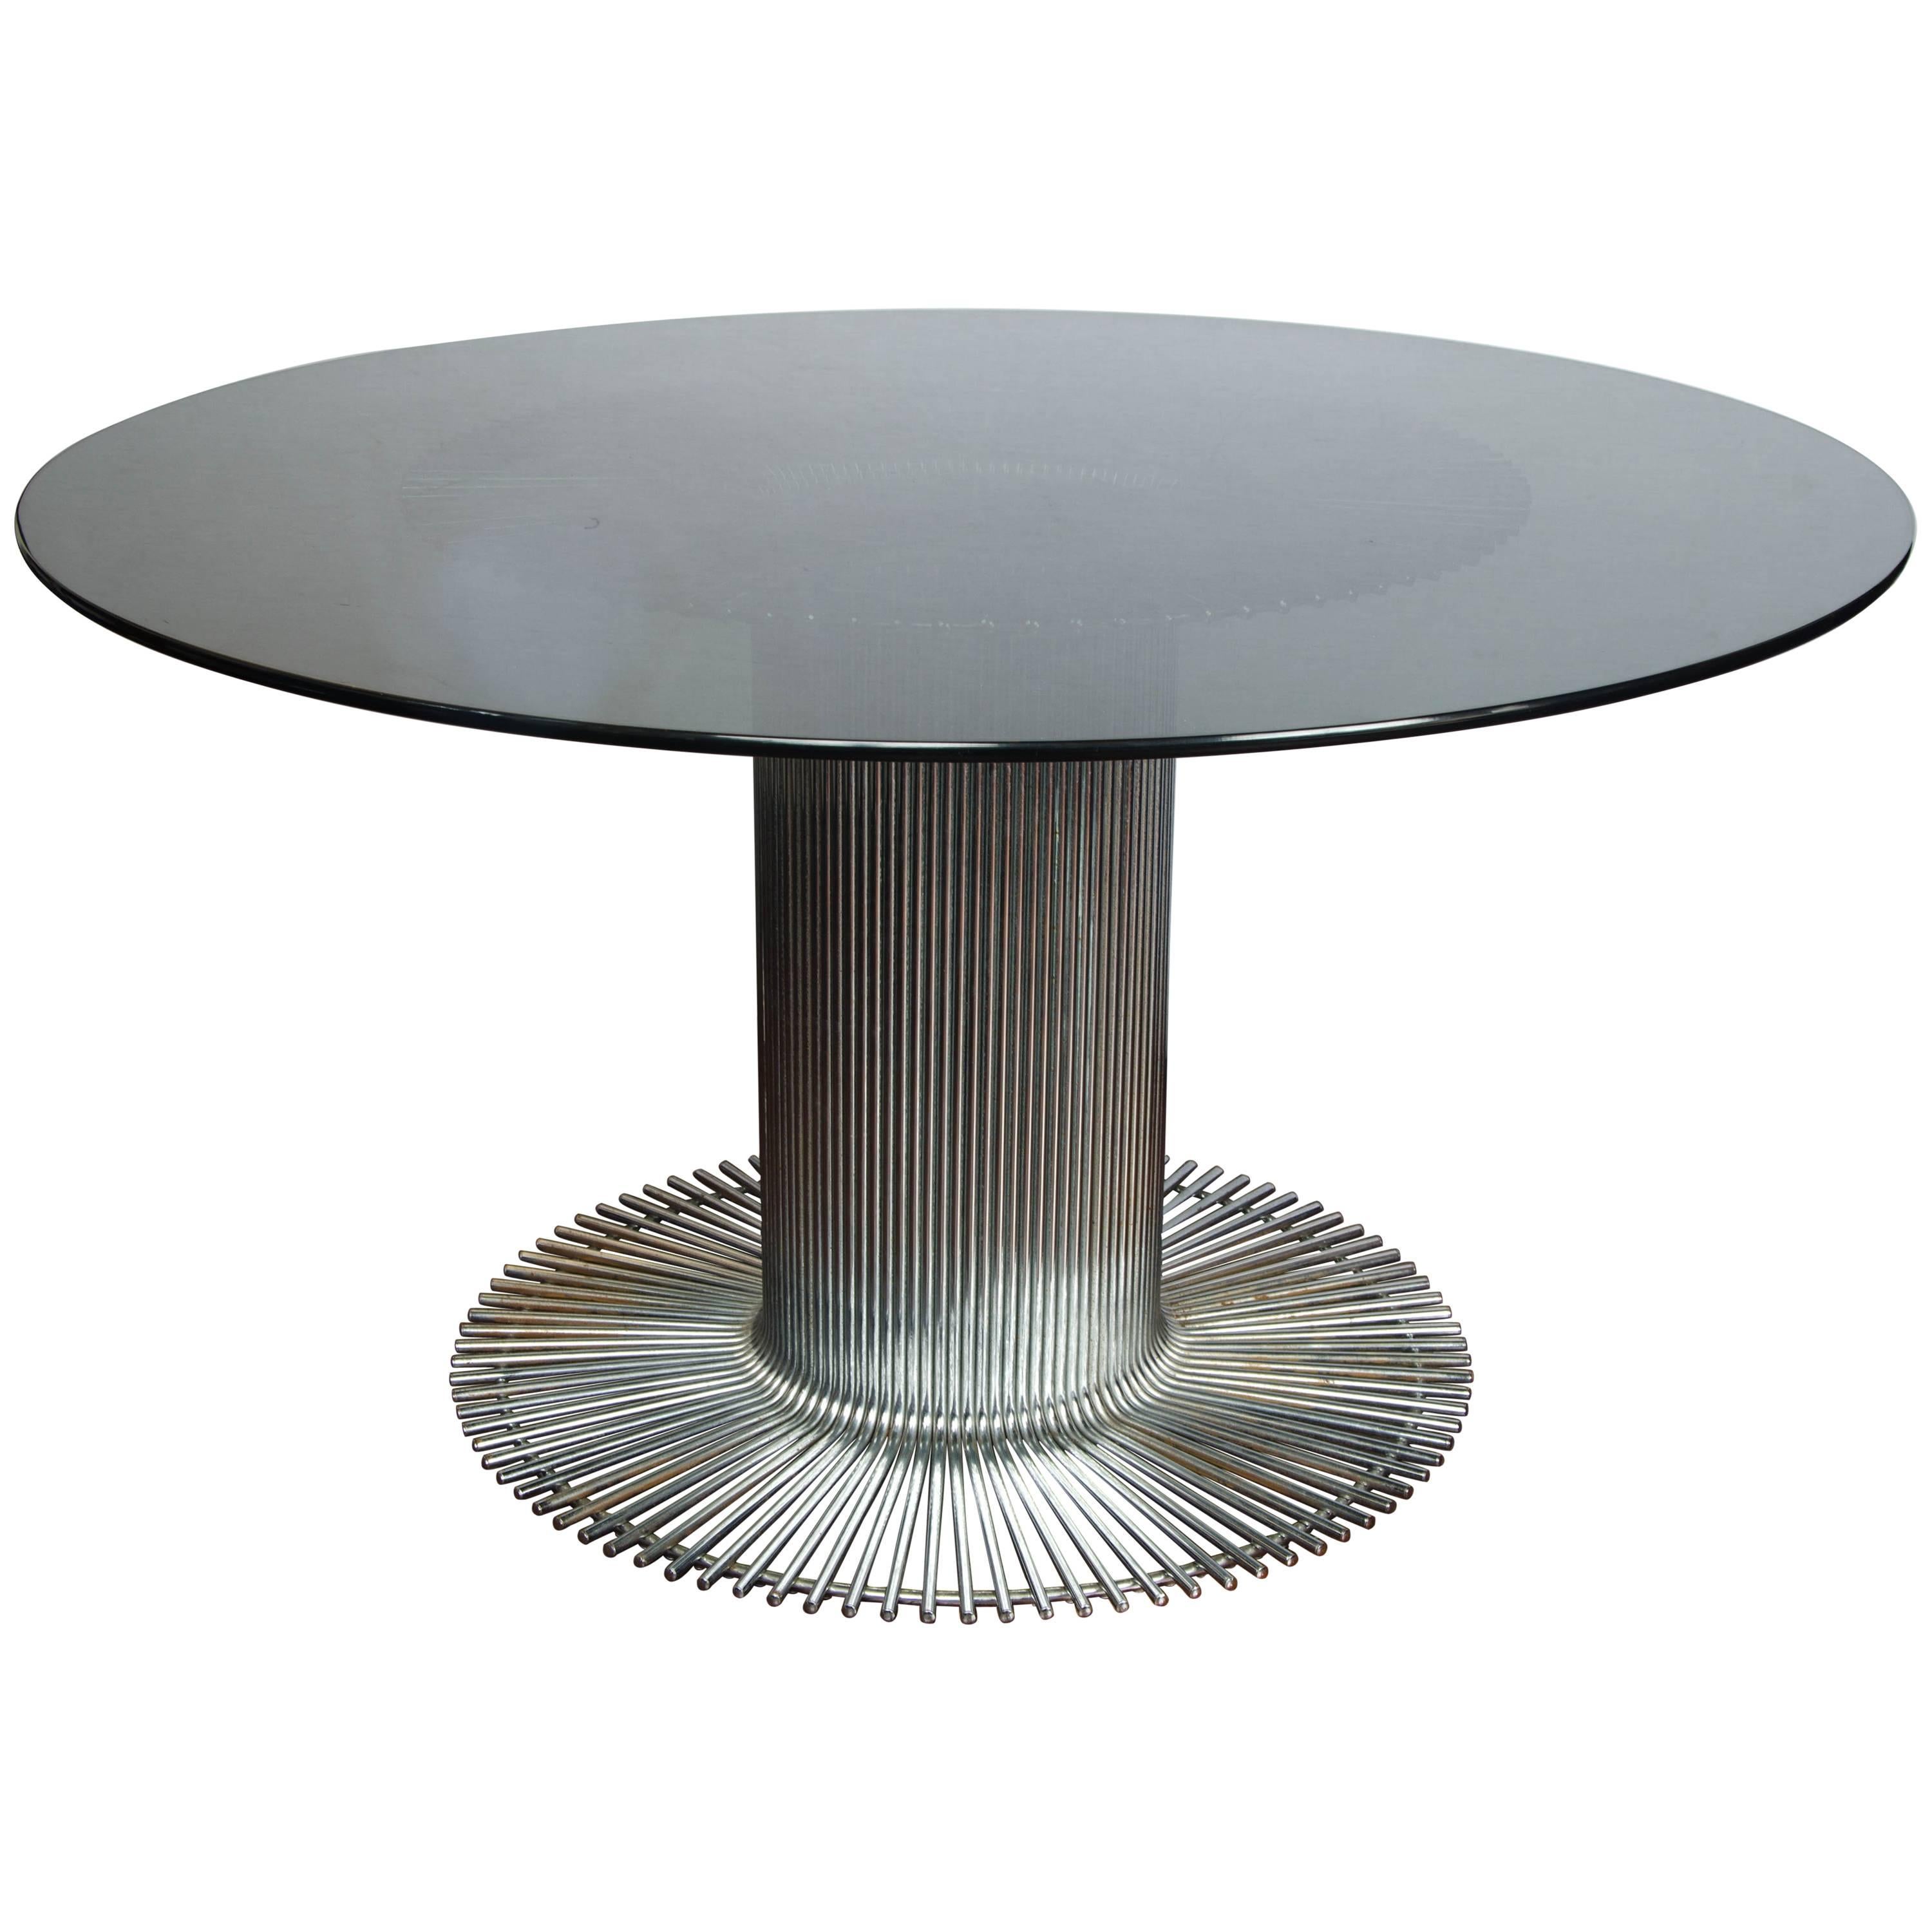 1950s Italian Fume' Glass Top Dining Table Attributed to Gastone Rinaldi